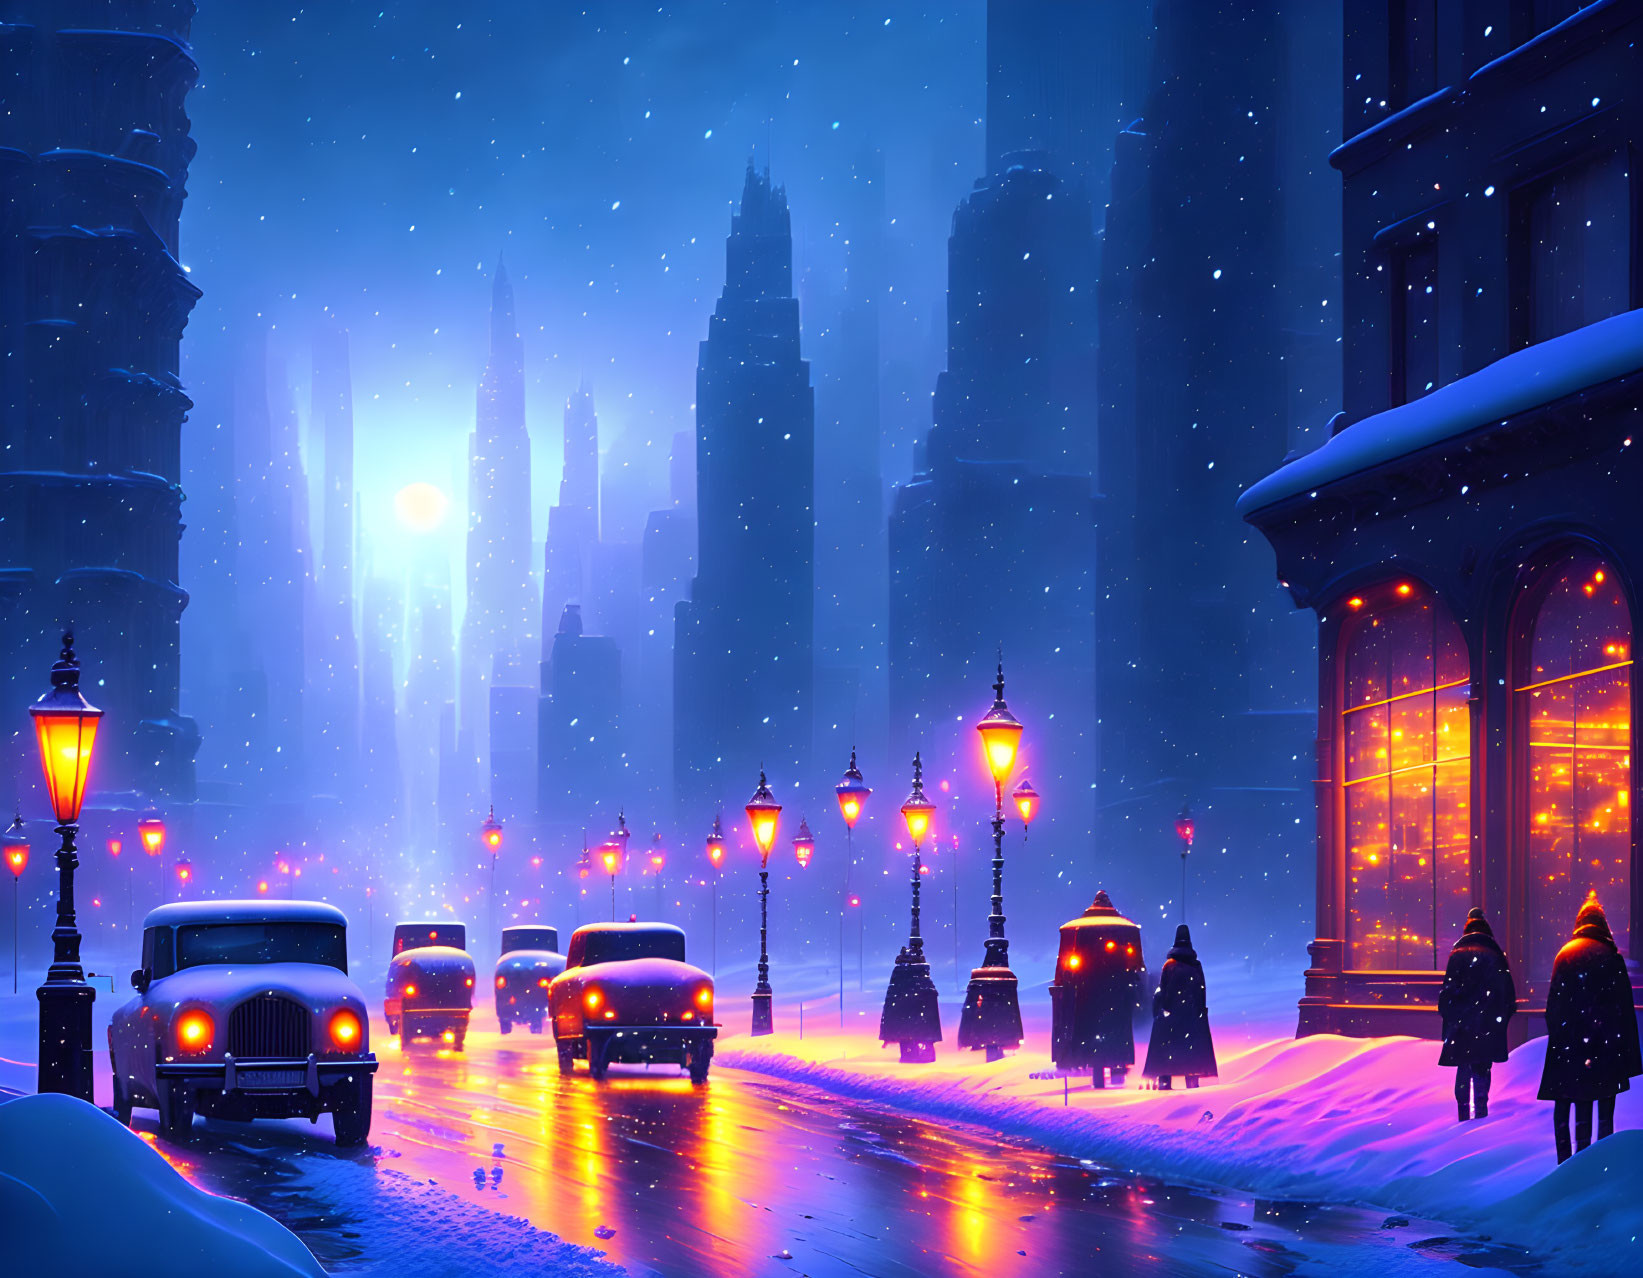 Snowy City Night Scene with Street Lamps, Cars, and Pedestrians